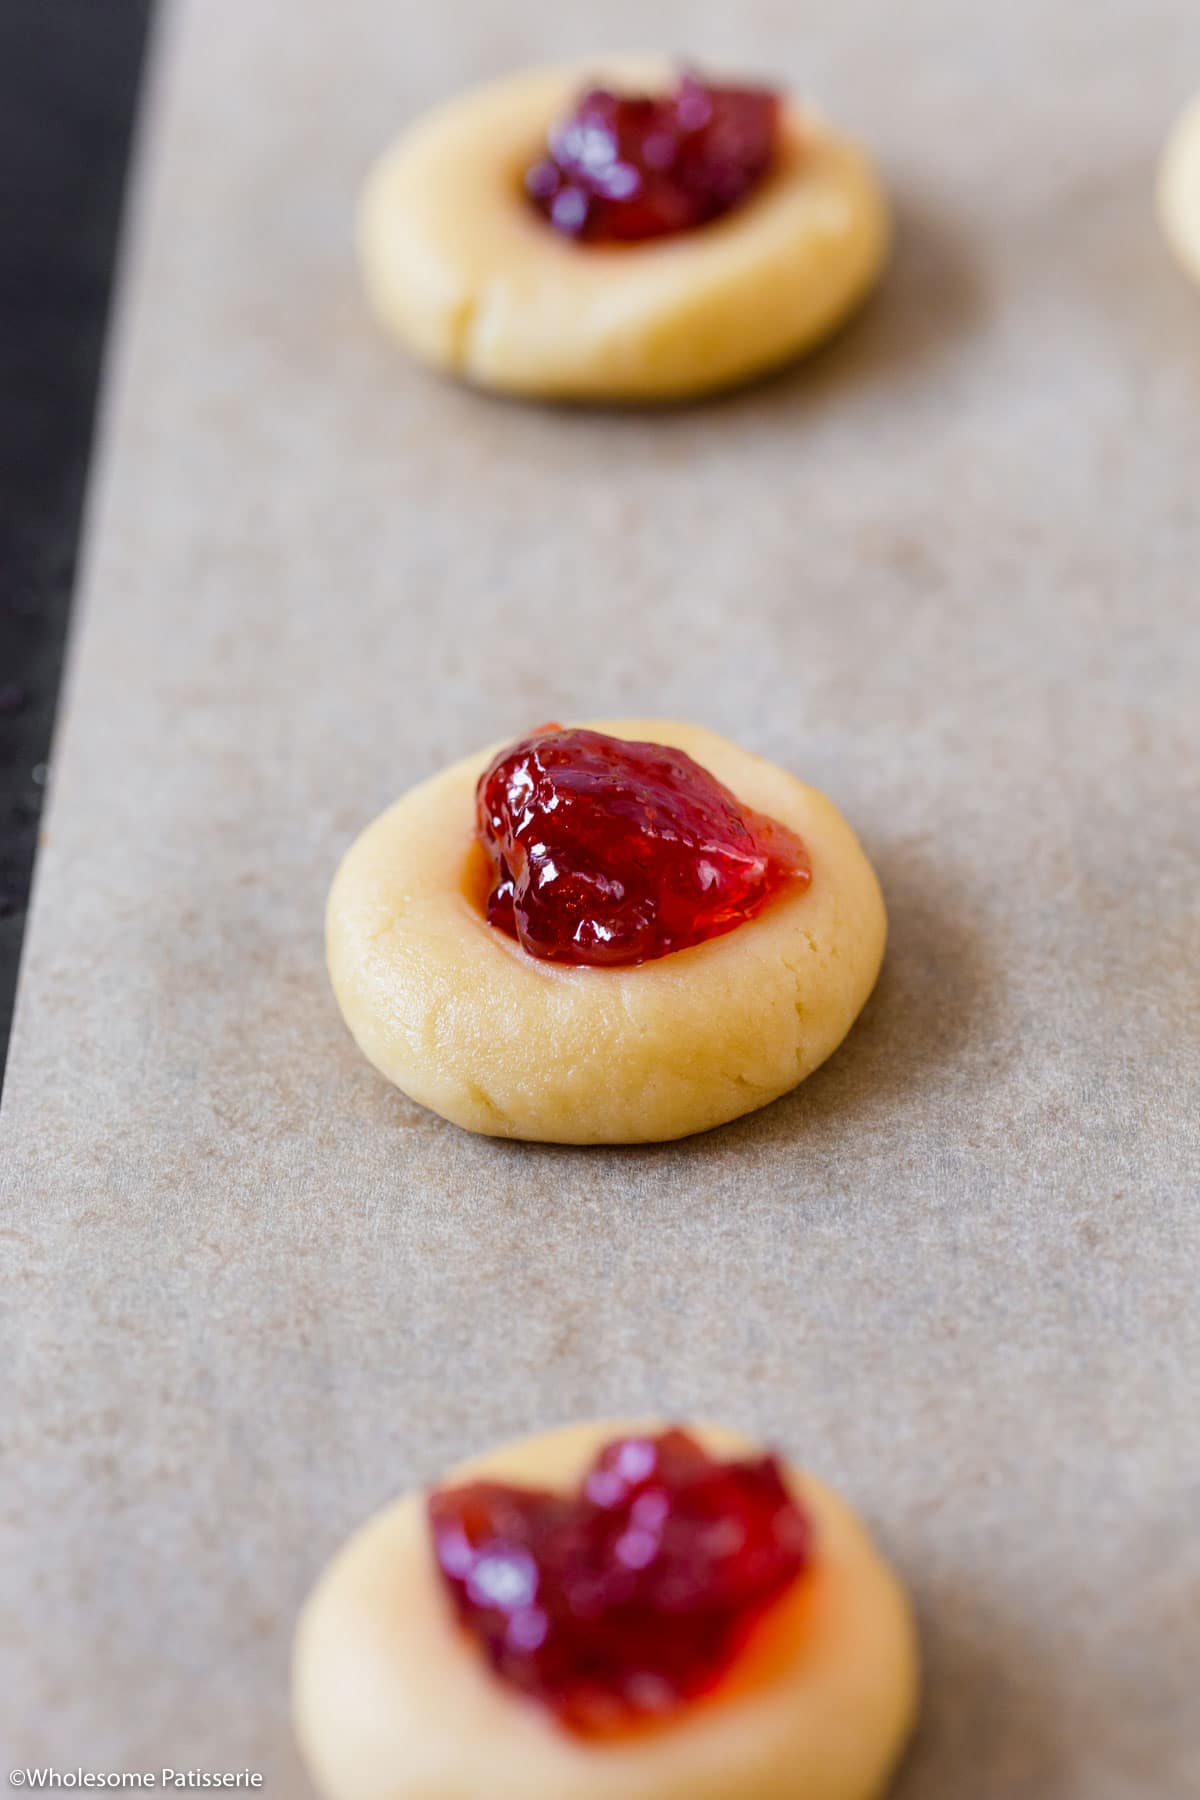 Filling each cookie with the jam